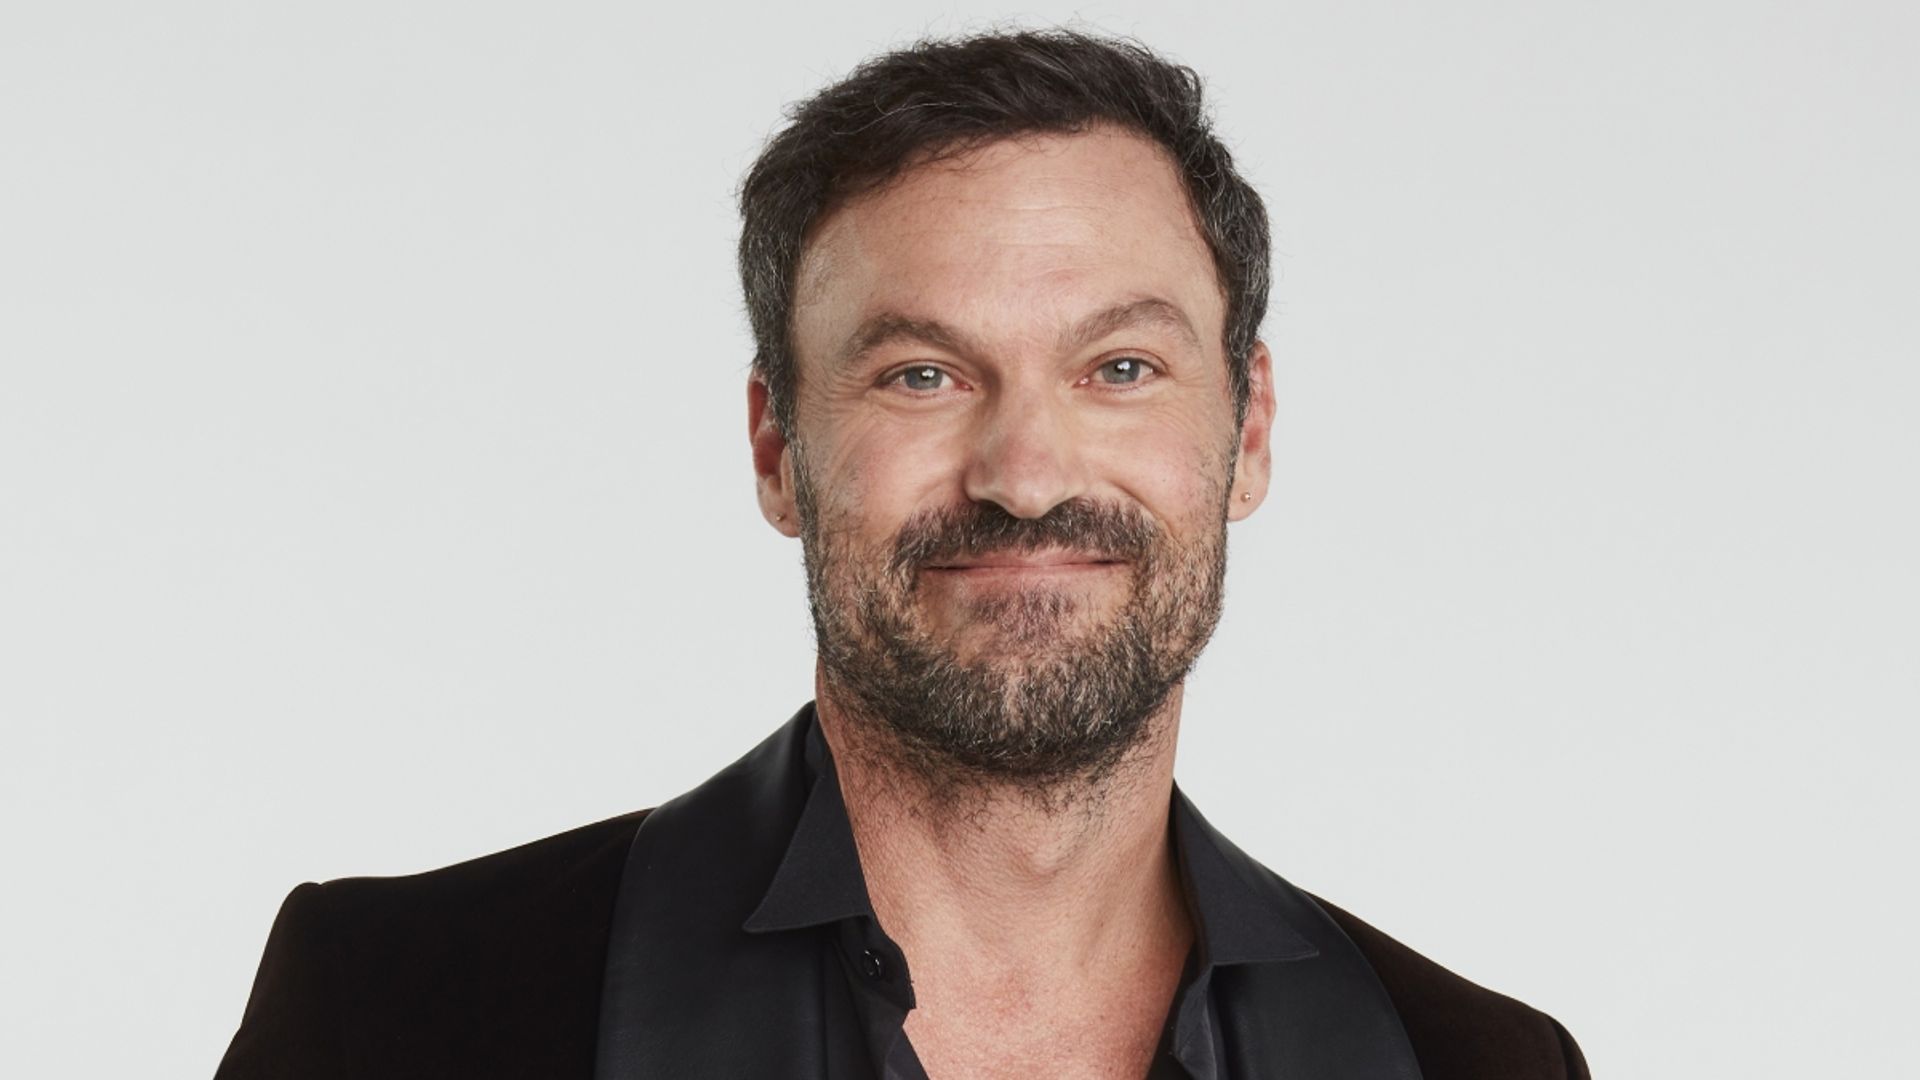 Brian Austin Green's incredible act of bravery leaves his co-stars in awe